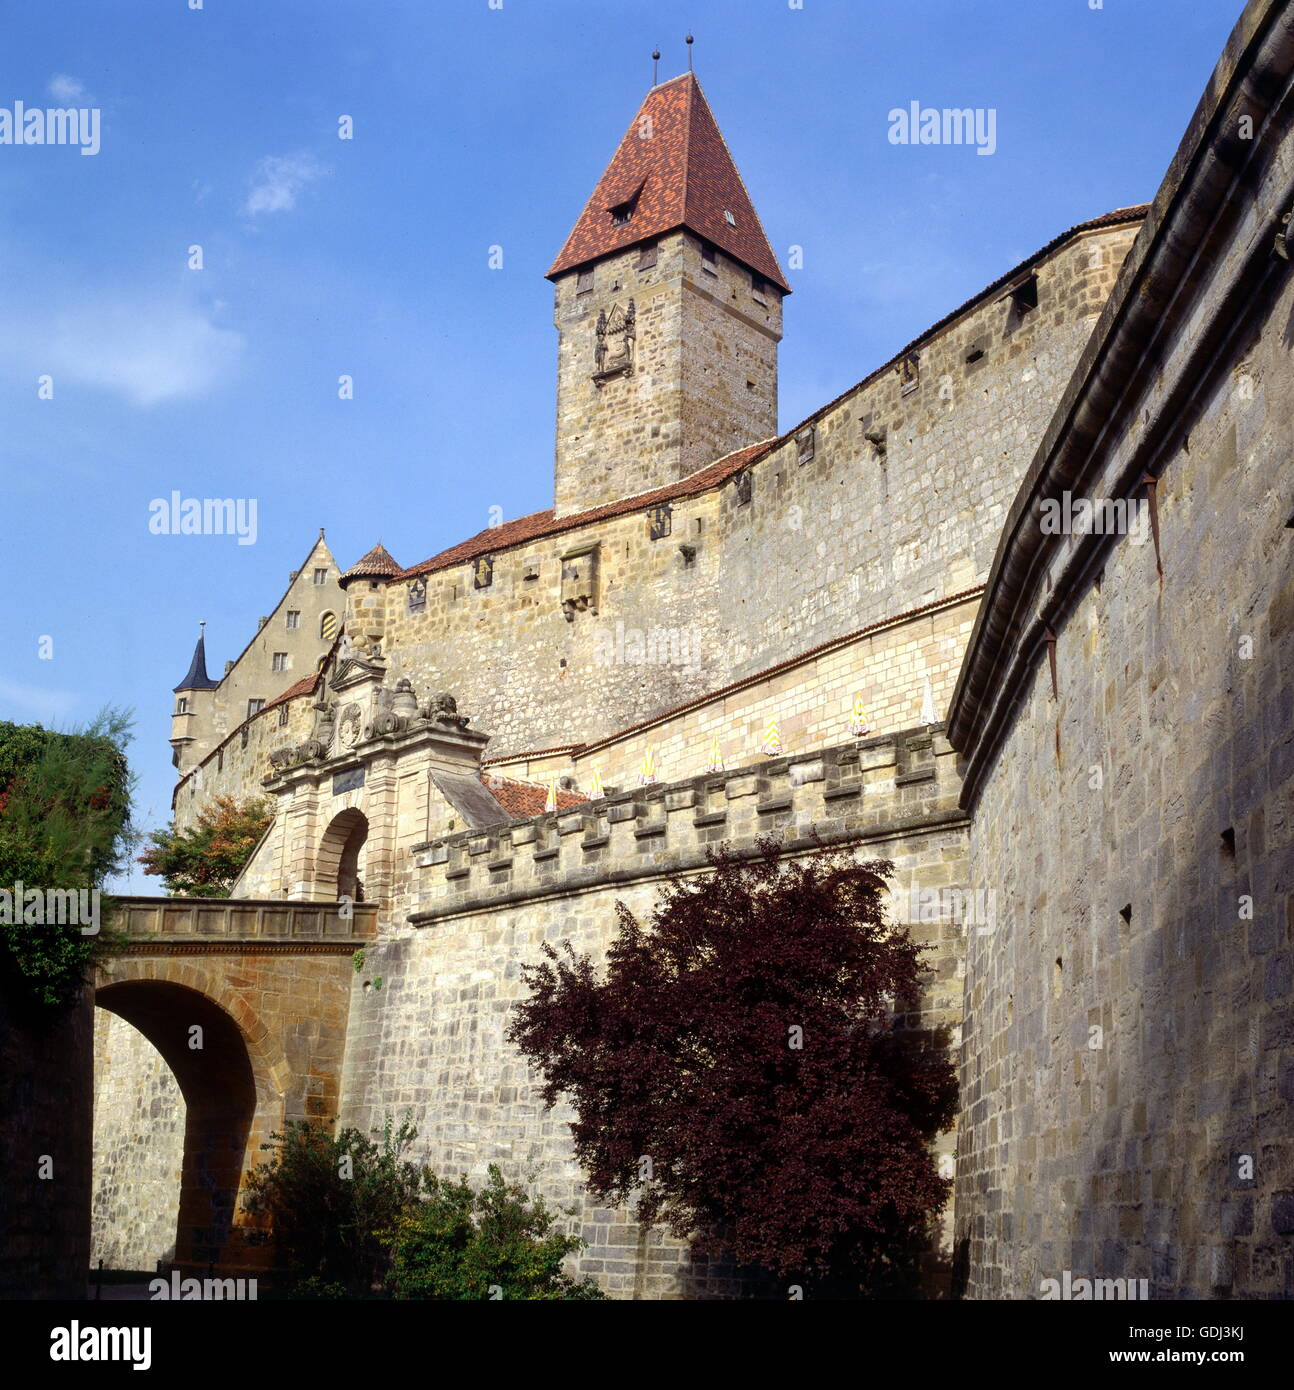 geography / travel, Germany, Bavaria, Coburg, Veste Coburg castle, fortification, 'Roter Turm' (red tower), exterior view, Stock Photo